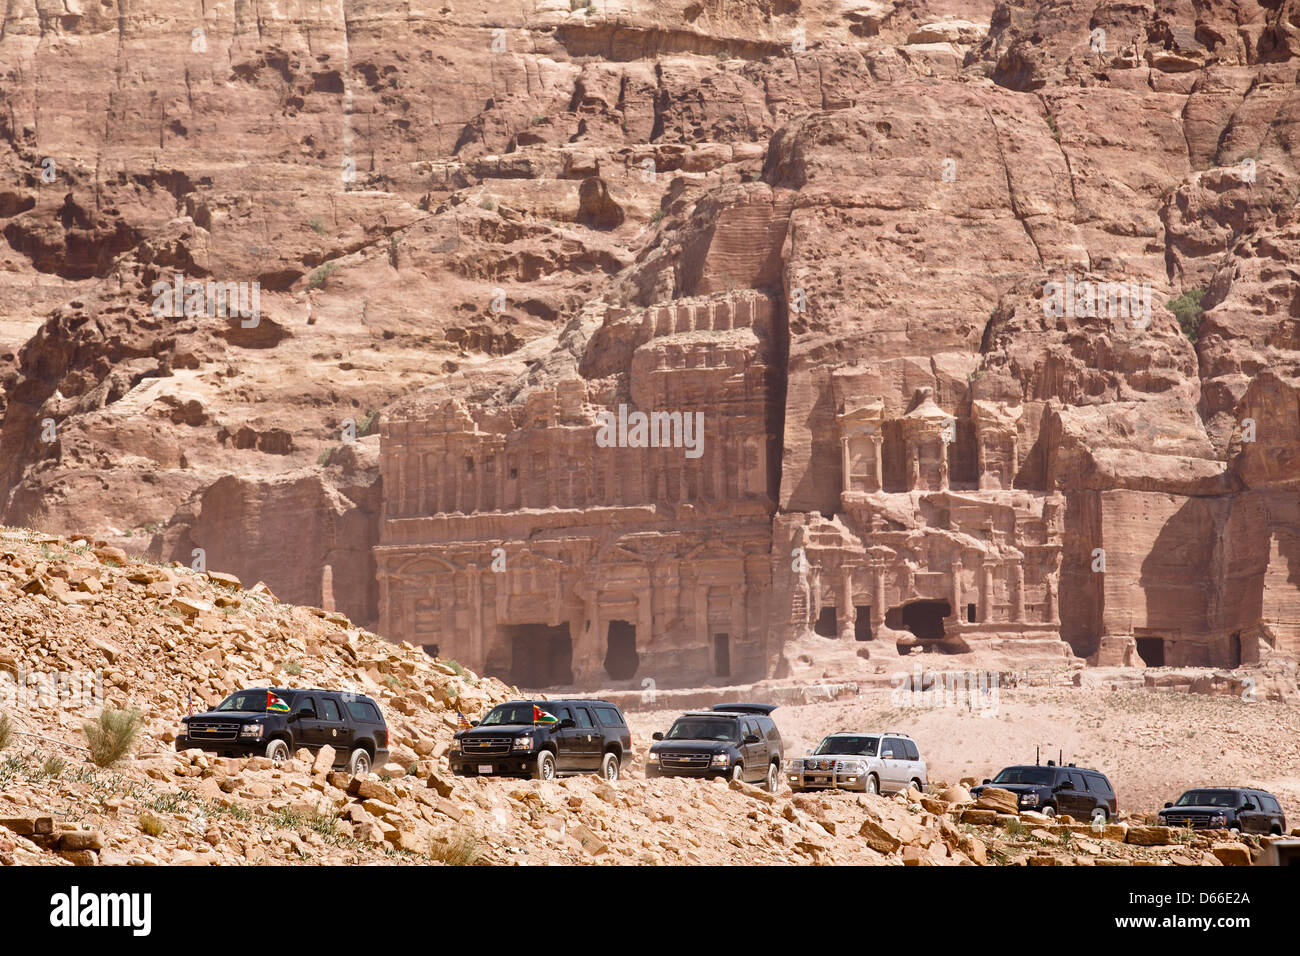 US President Barack Obama's motorcade departs the ancient city of Petra March 23, 2013 in Jordan. Stock Photo